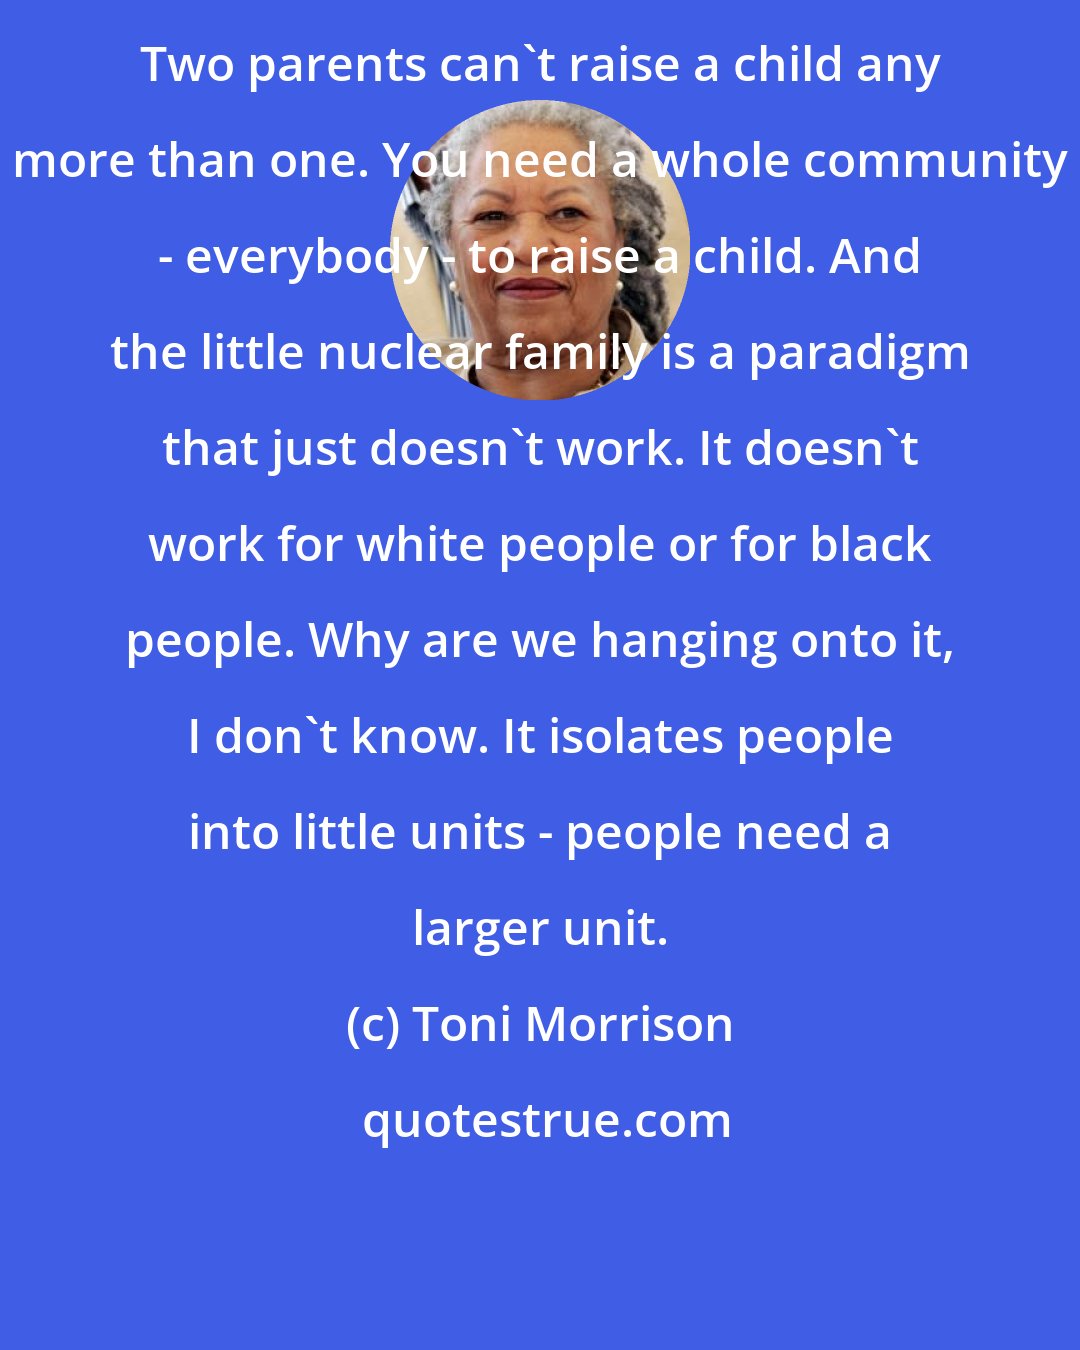 Toni Morrison: Two parents can't raise a child any more than one. You need a whole community - everybody - to raise a child. And the little nuclear family is a paradigm that just doesn't work. It doesn't work for white people or for black people. Why are we hanging onto it, I don't know. It isolates people into little units - people need a larger unit.